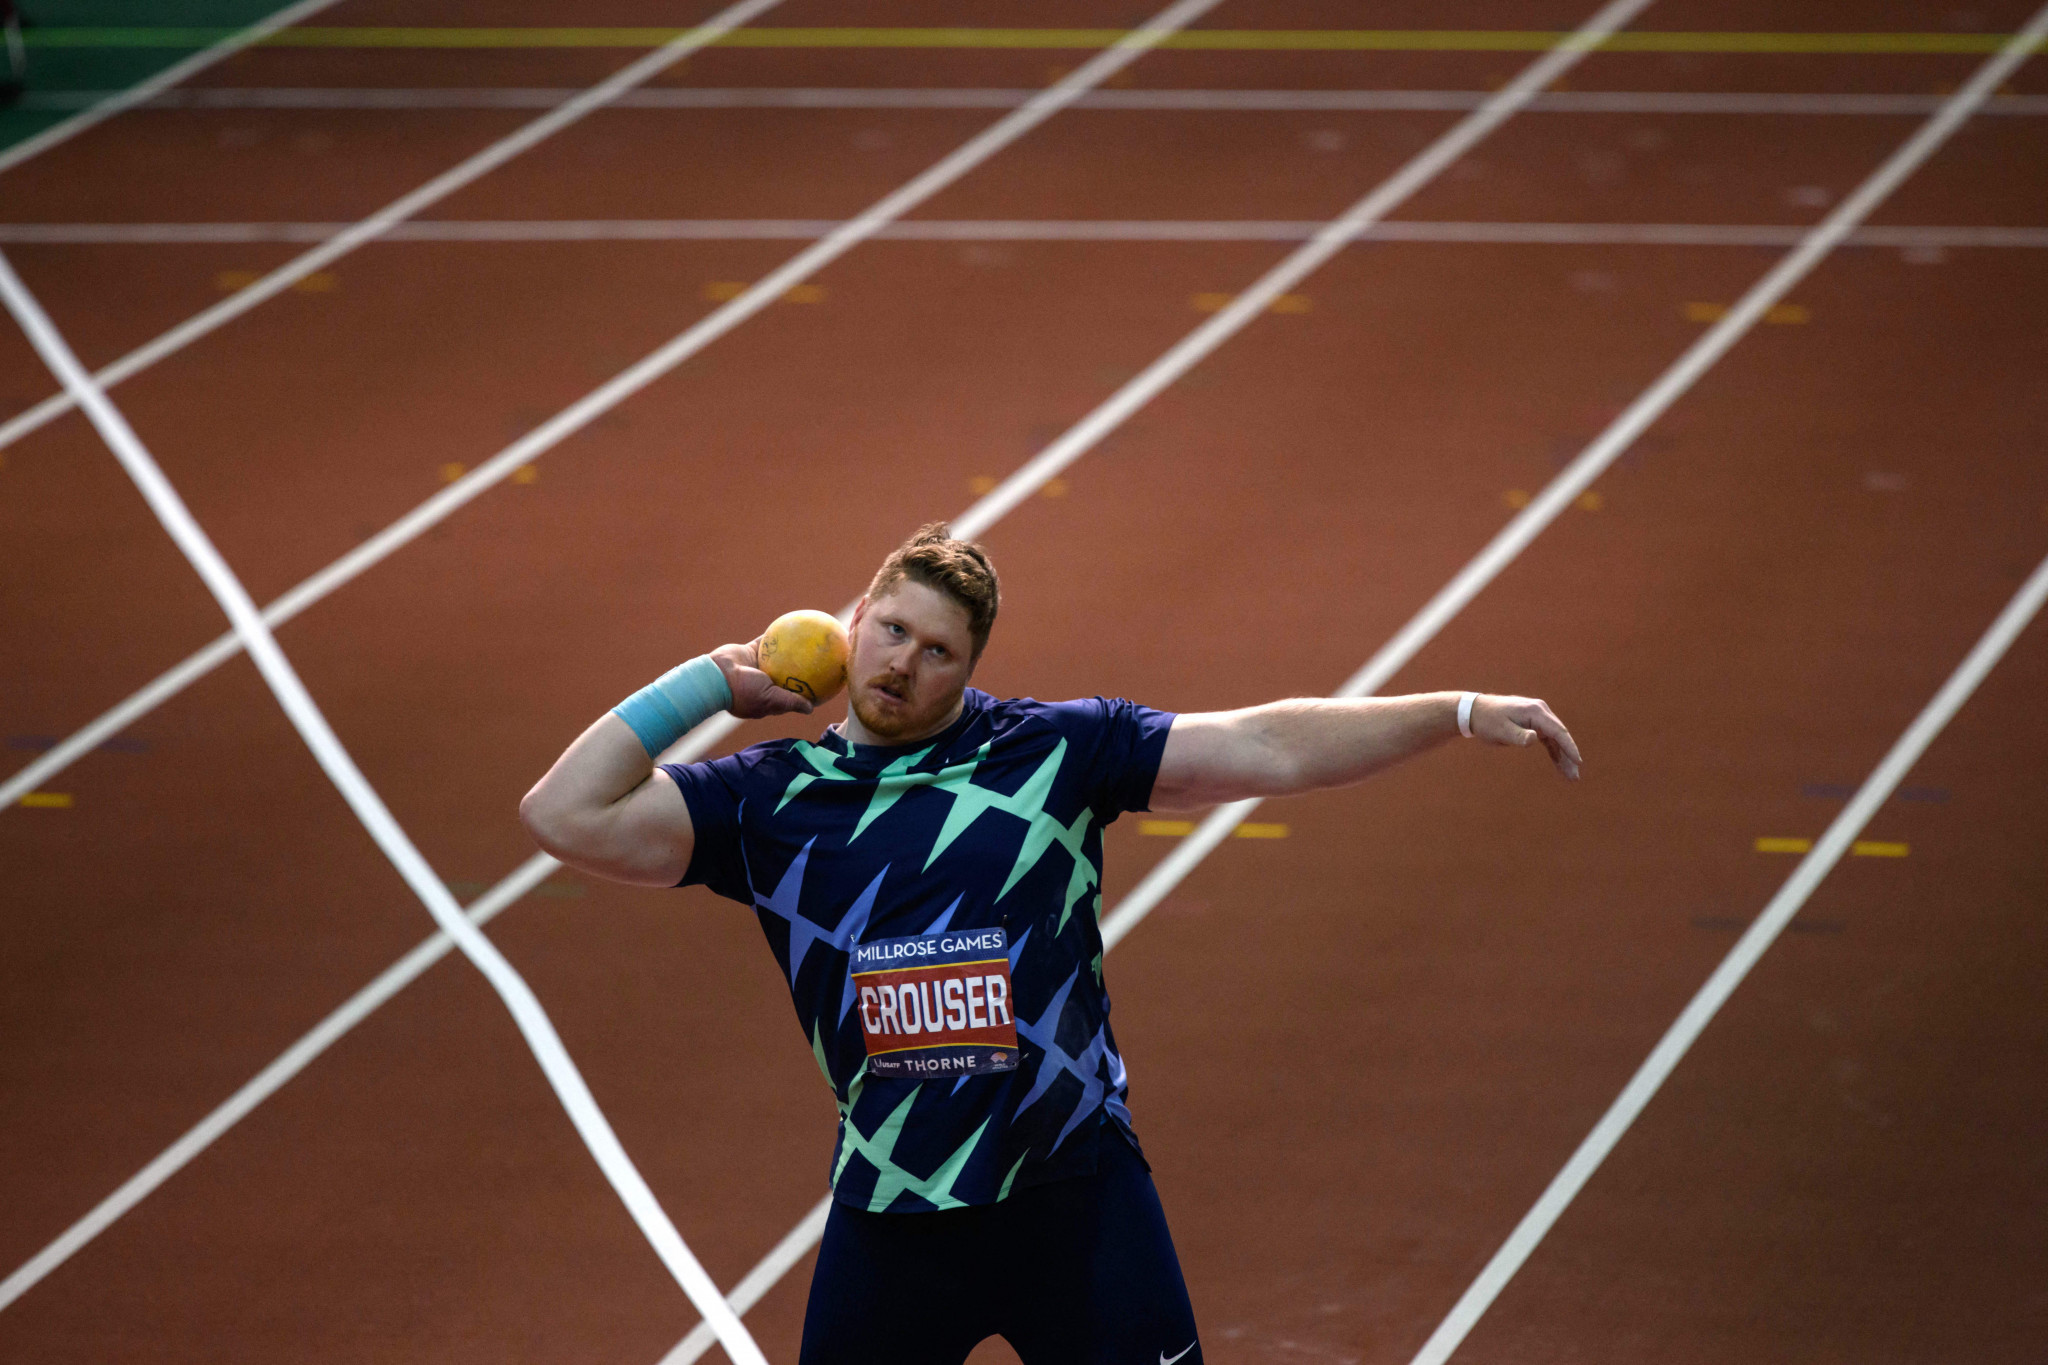 Crouser's shot put "world record" at Millrose Games vanishes as Coleman re-appears with 60m win